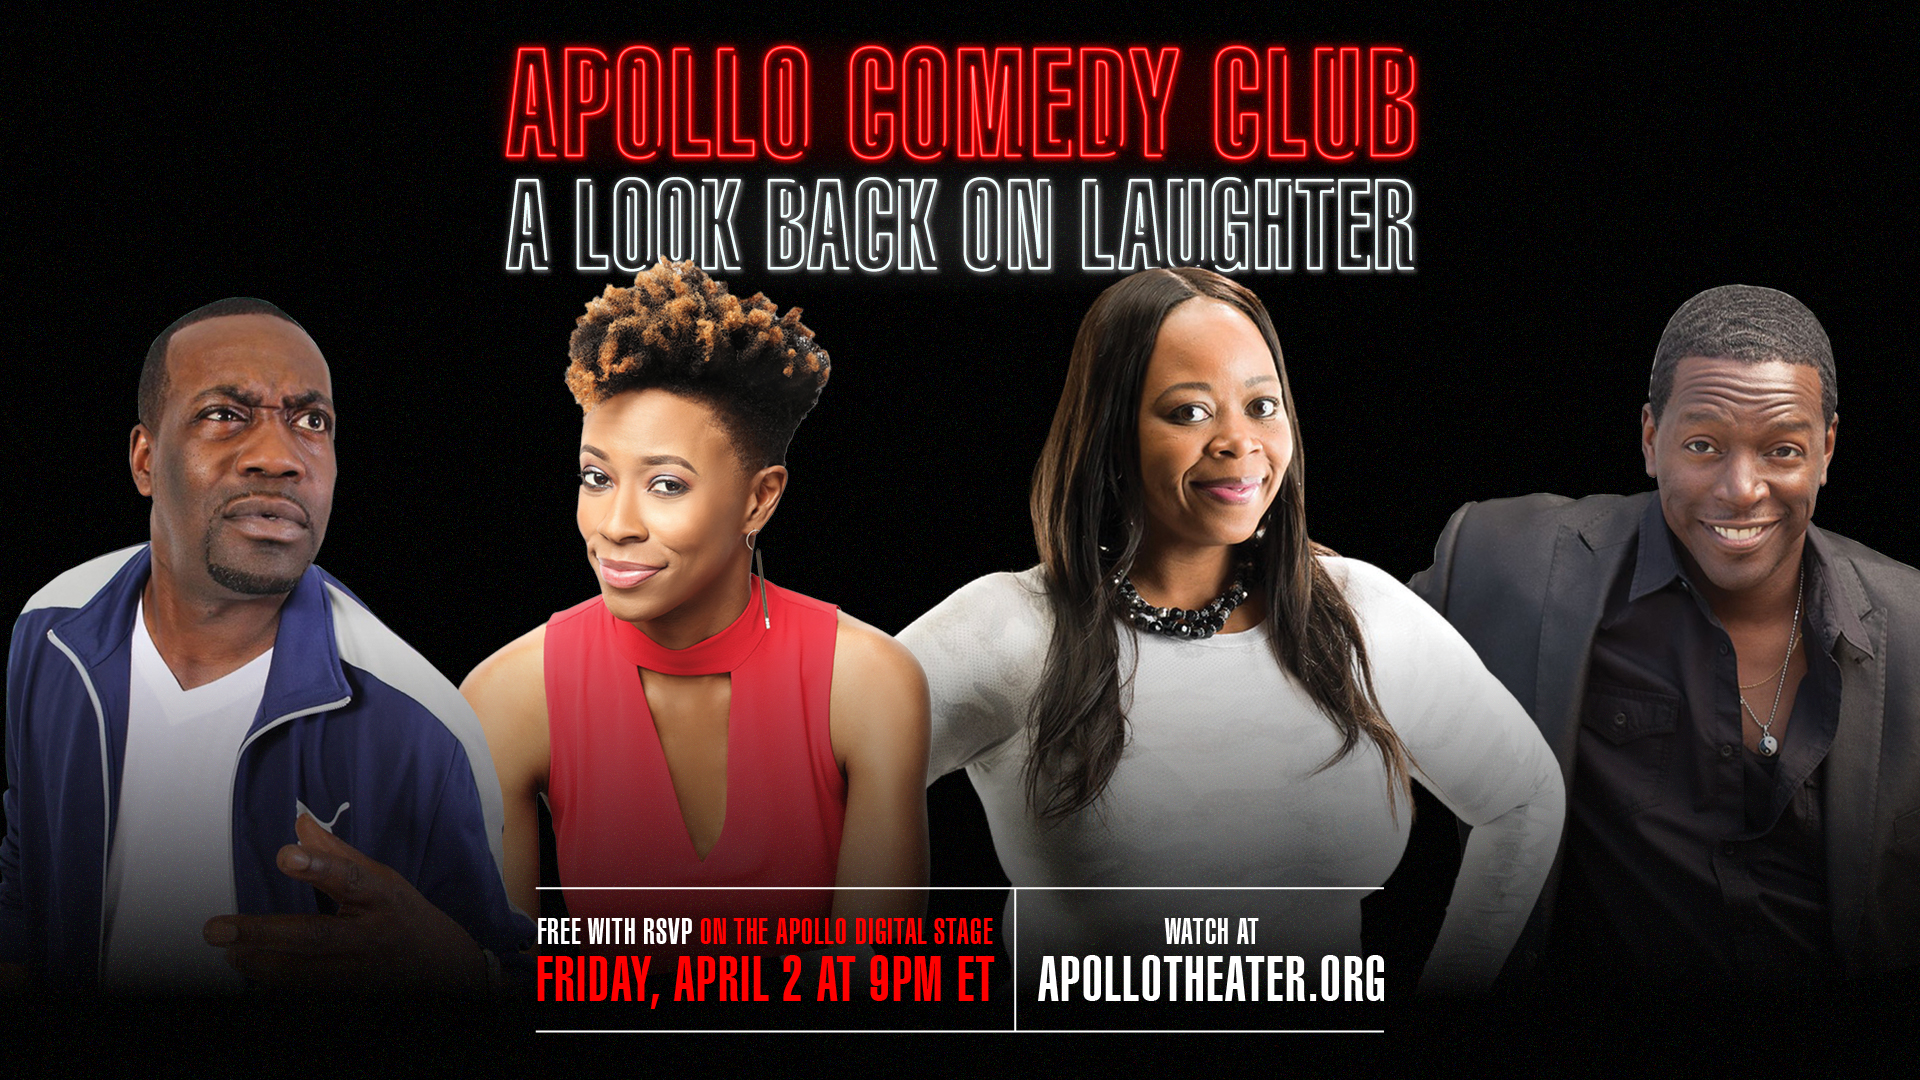 Apollo Comedy Club: A Look Back on Laughter